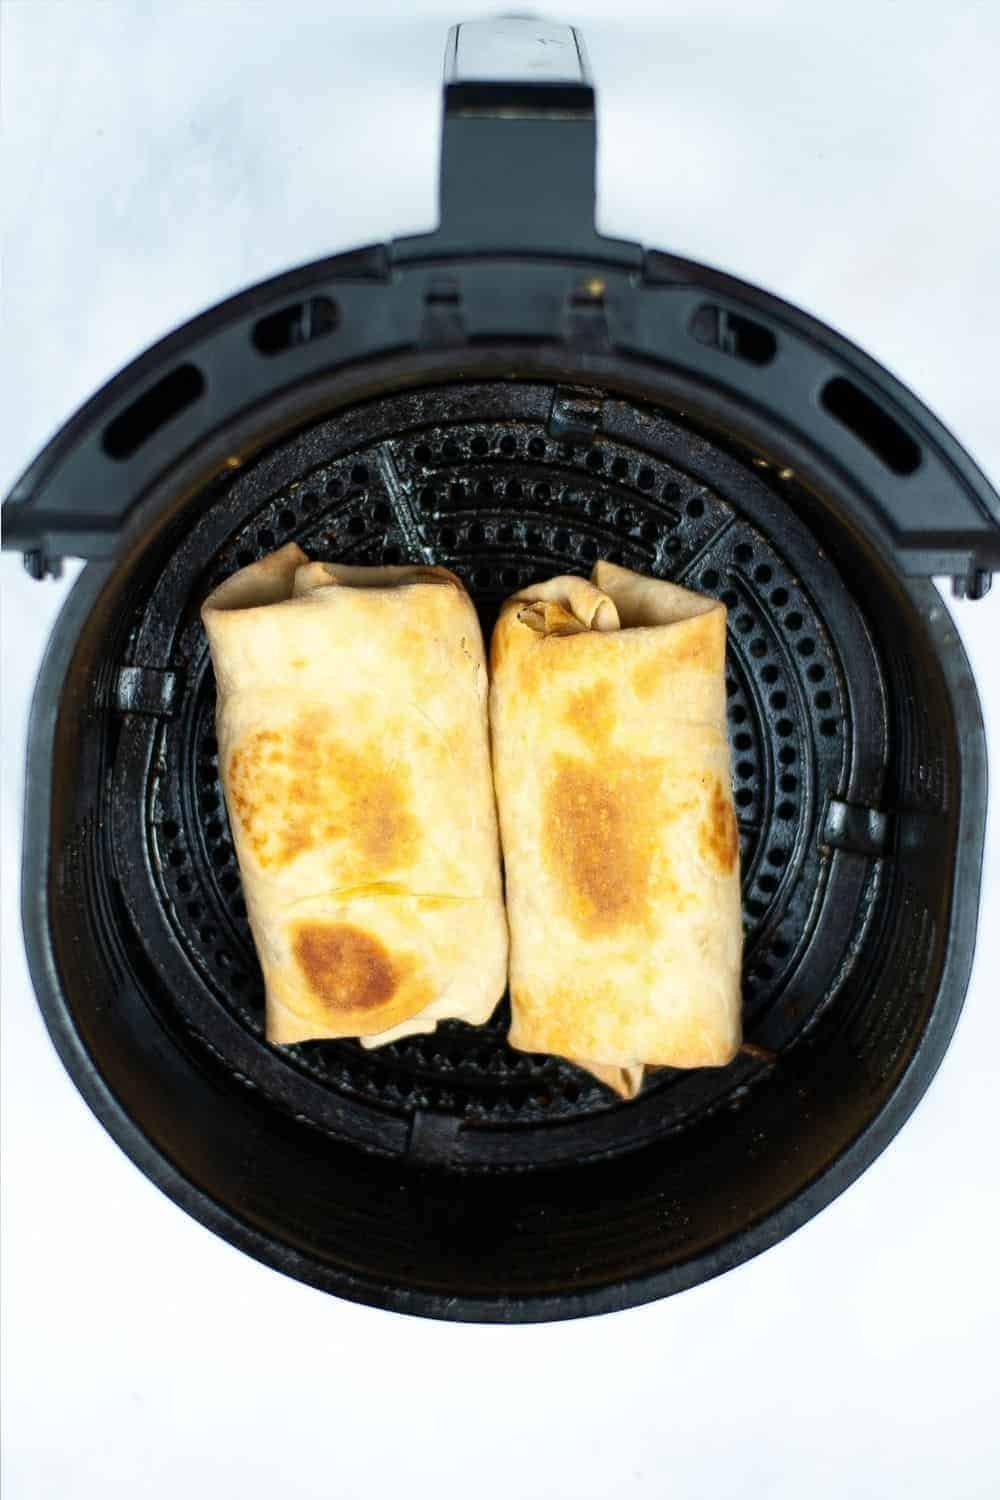 Reheat a Burrito in the Air Fryer